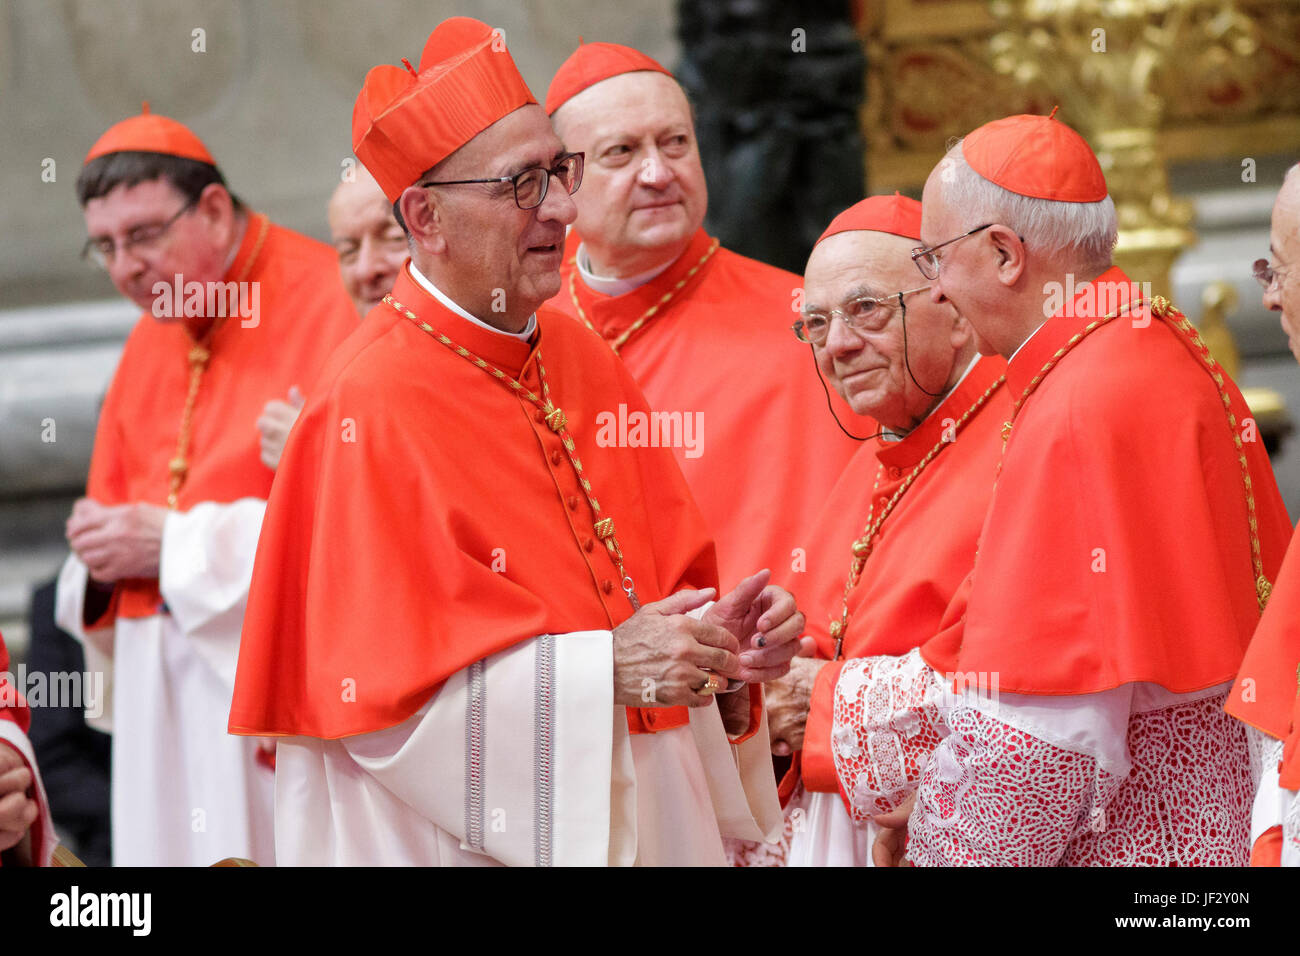 Vatican City, Vatican. 28th June, 2017. New Cardinal Juan Jose Omella, Archbishop of Barcelona, greets by other Cardinals after he received the red three-cornered biretta hat from Pope Francis during the Ordinary Public Consistory in St. Peter's Basilica in Vatican City, Vatican on June 28, 2017. The 5 new cardinals are below 80 and would therefore be entitled to vote in a conclave to decide a new pontiff. Credit: Giuseppe Ciccia/Pacific Press/Alamy Live News Stock Photo